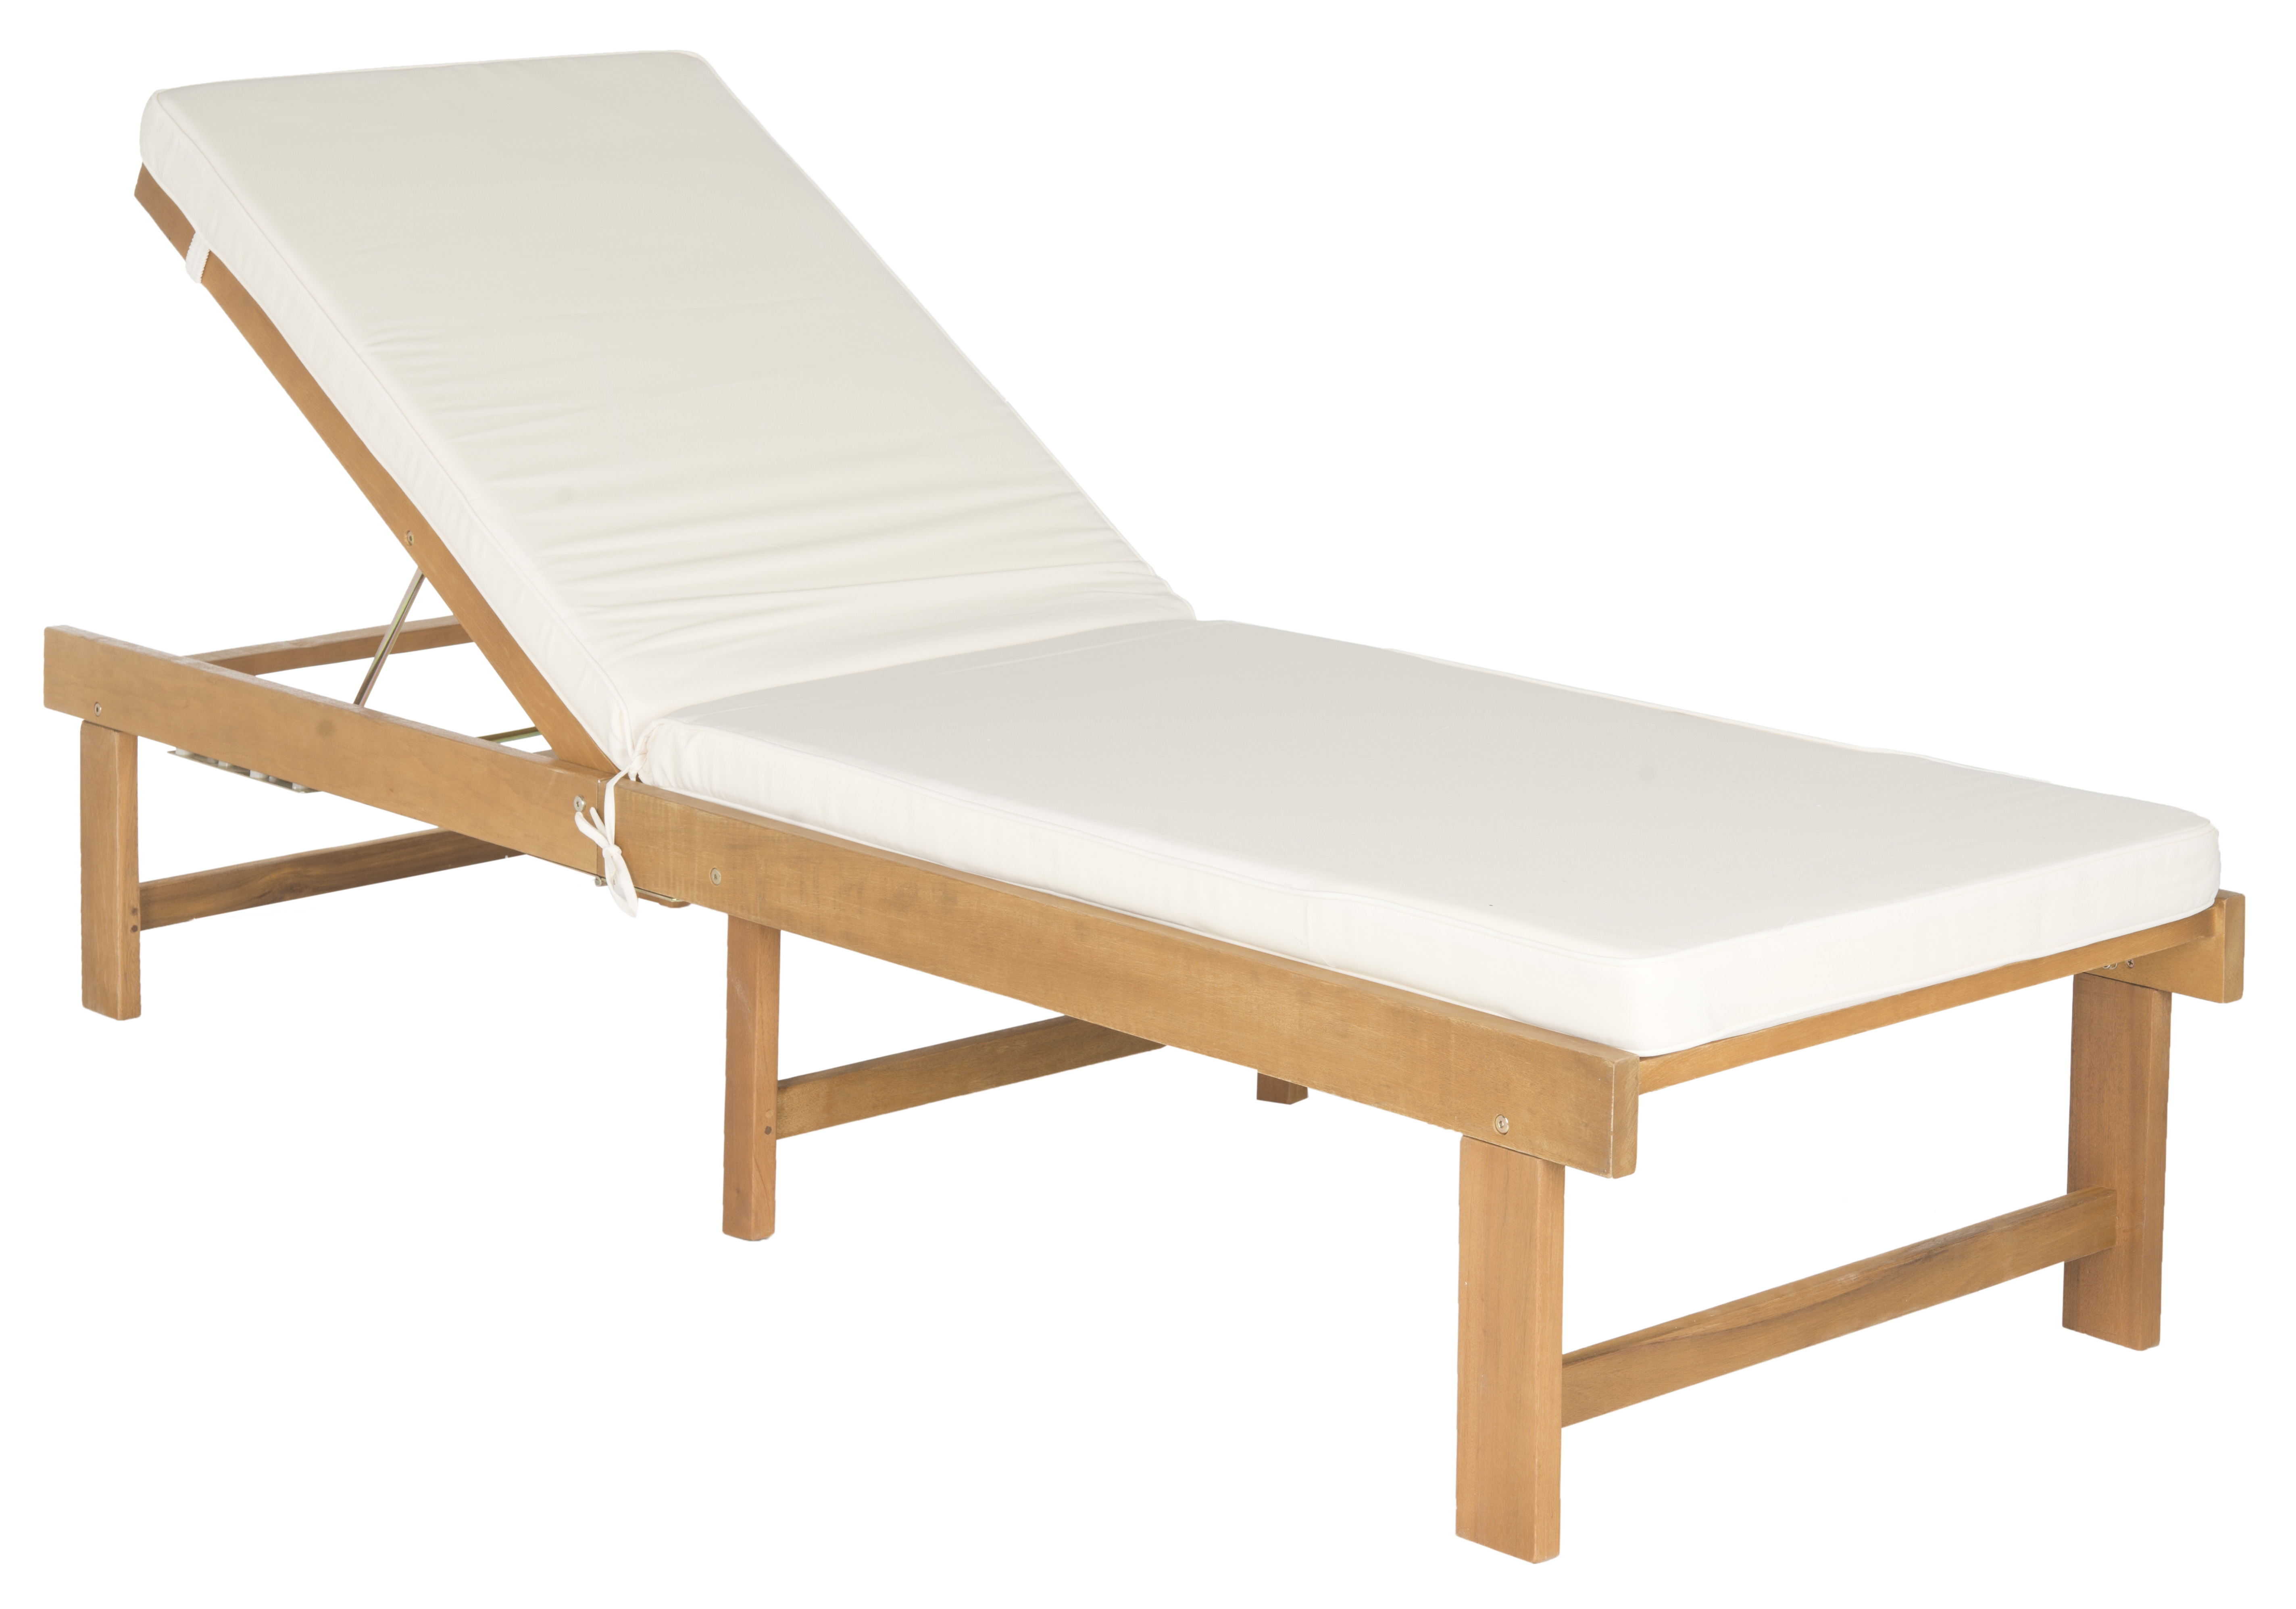 Inglewood Chaise Lounge Chair - Natural/Beige - Safavieh - Image 0